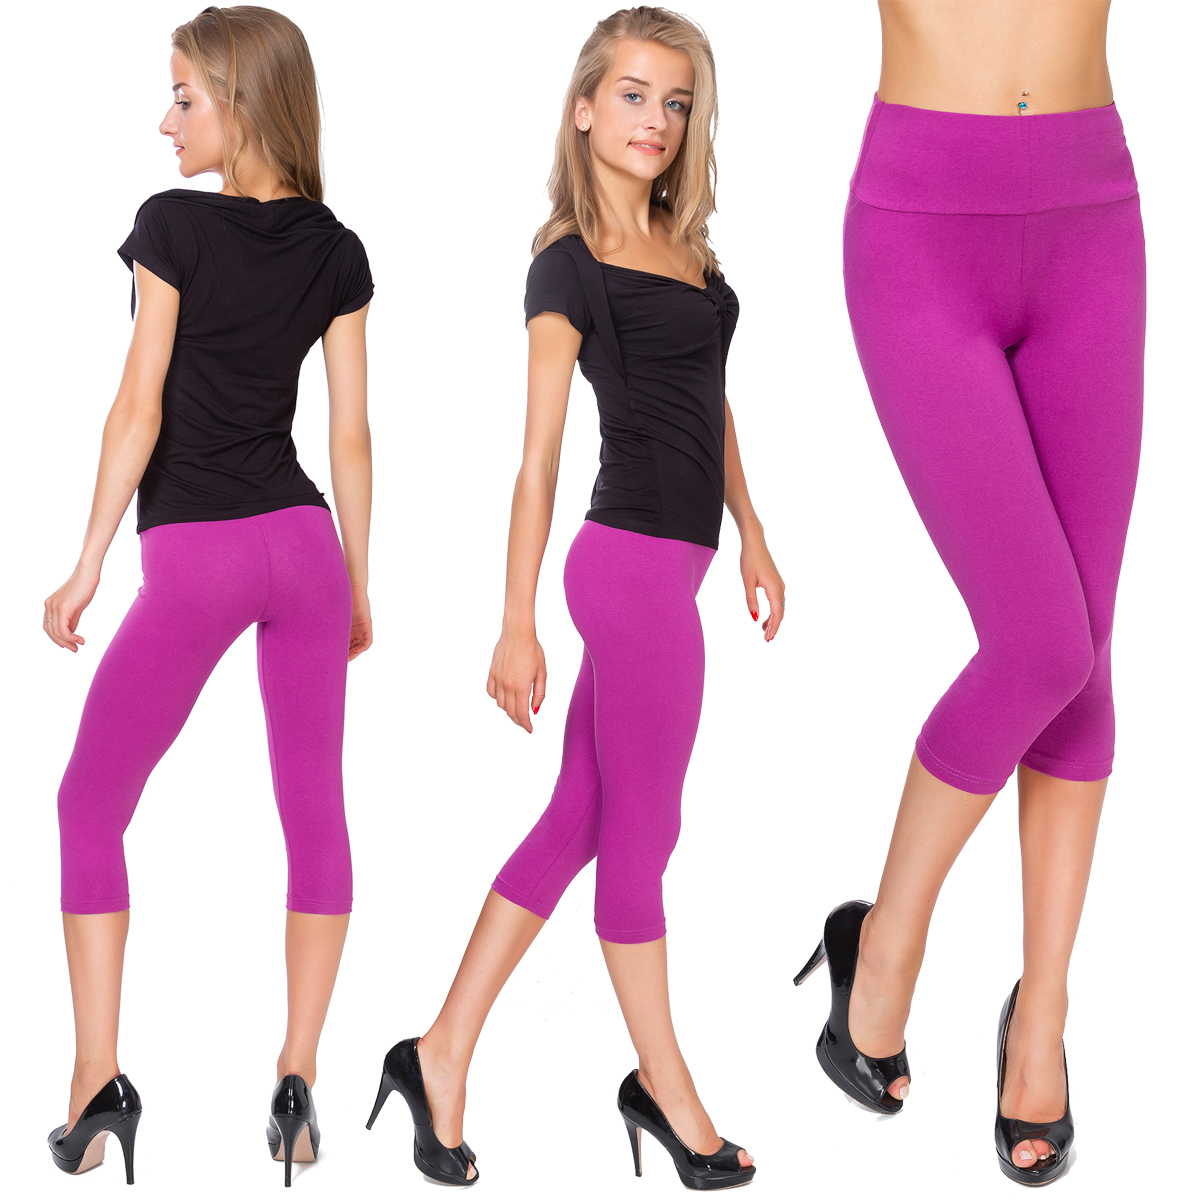 Cropped Leggings With Lace 3/4 Length Casual Cotton Pants Hot Colours Sizes 8-22